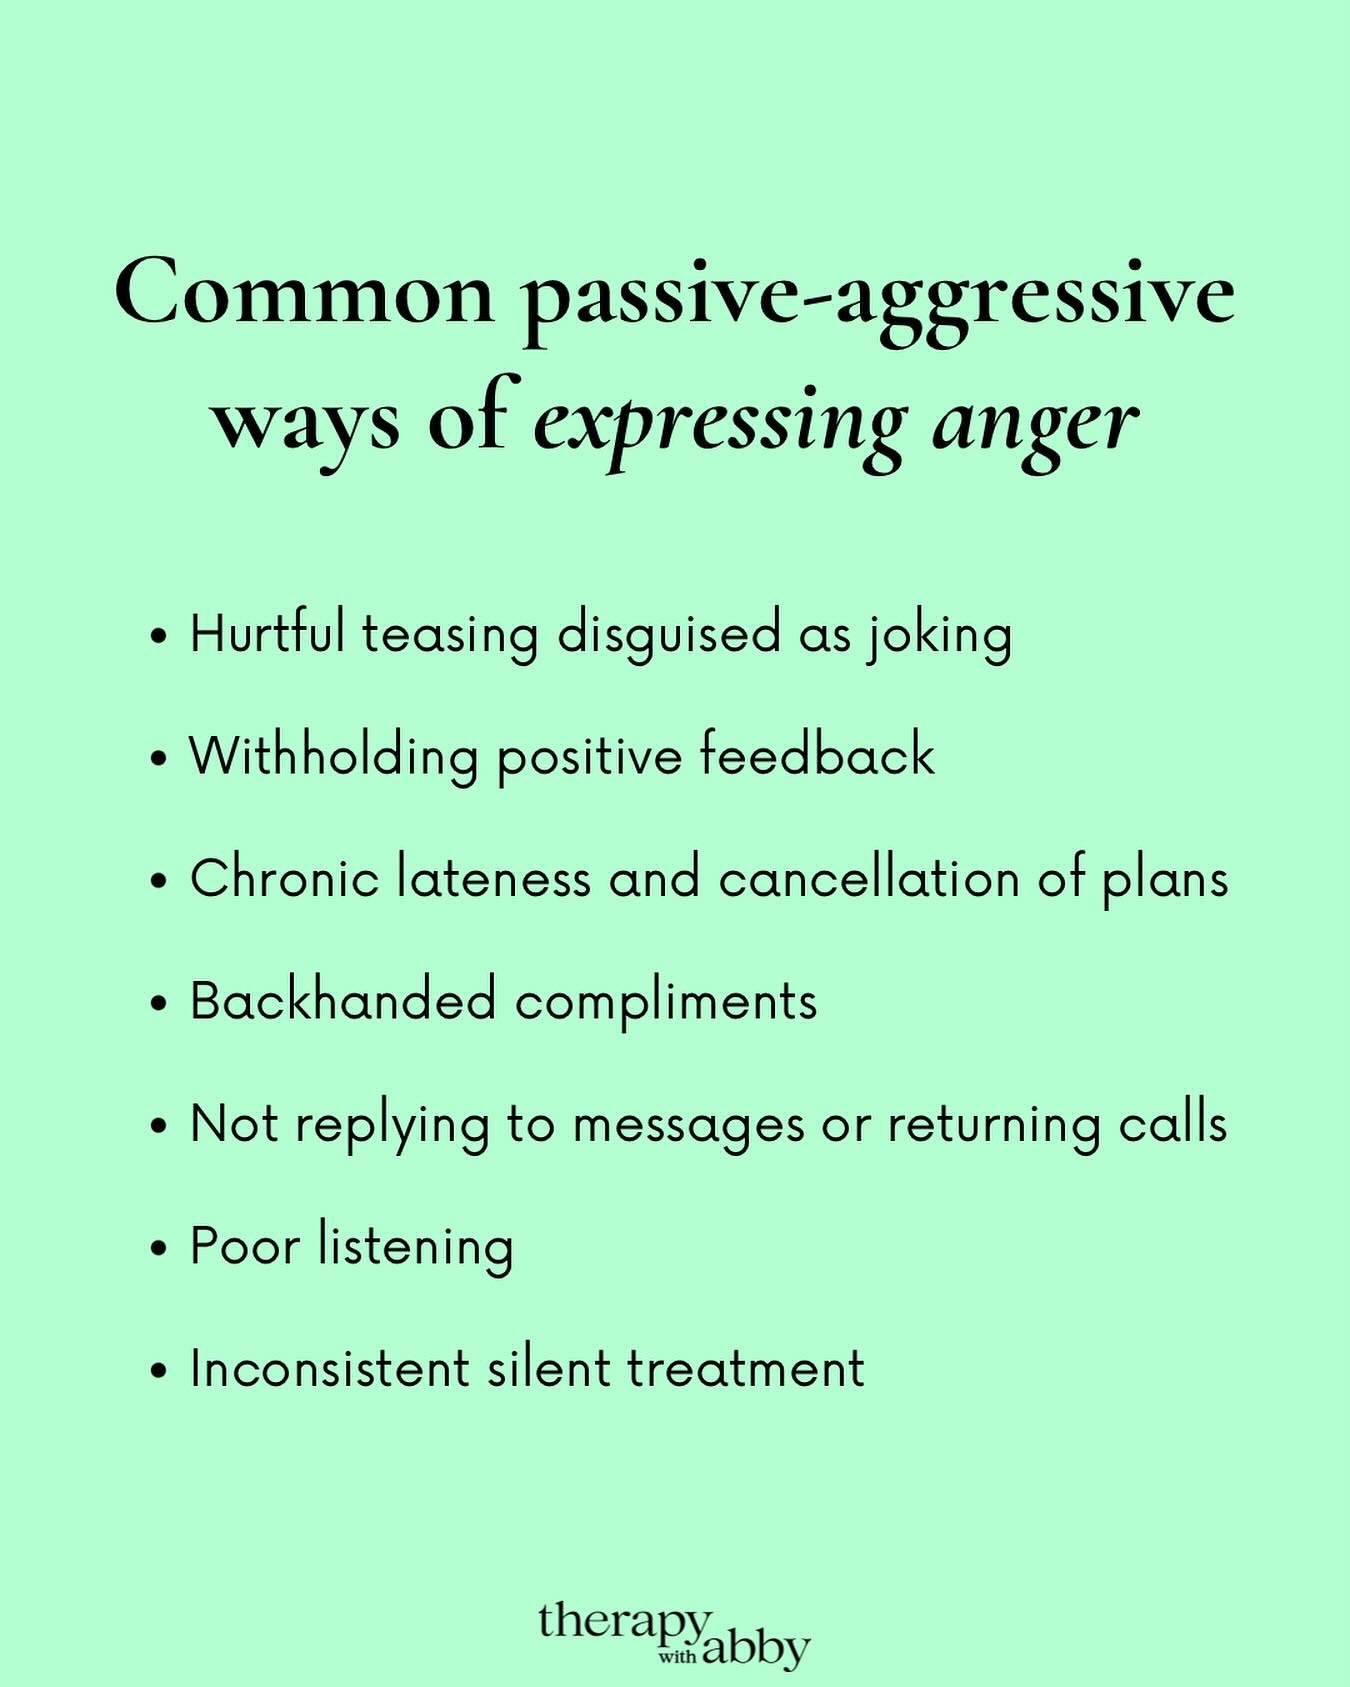 Being passive aggressive isn&rsquo;t about being malicious.
⠀⠀⠀⠀⠀⠀⠀⠀⠀
It&rsquo;s often a strategy people use when they think they don&rsquo;t deserve to speak their minds or they are afraid to express their anger.
⠀⠀⠀⠀⠀⠀⠀⠀⠀
Do you recognise any of th